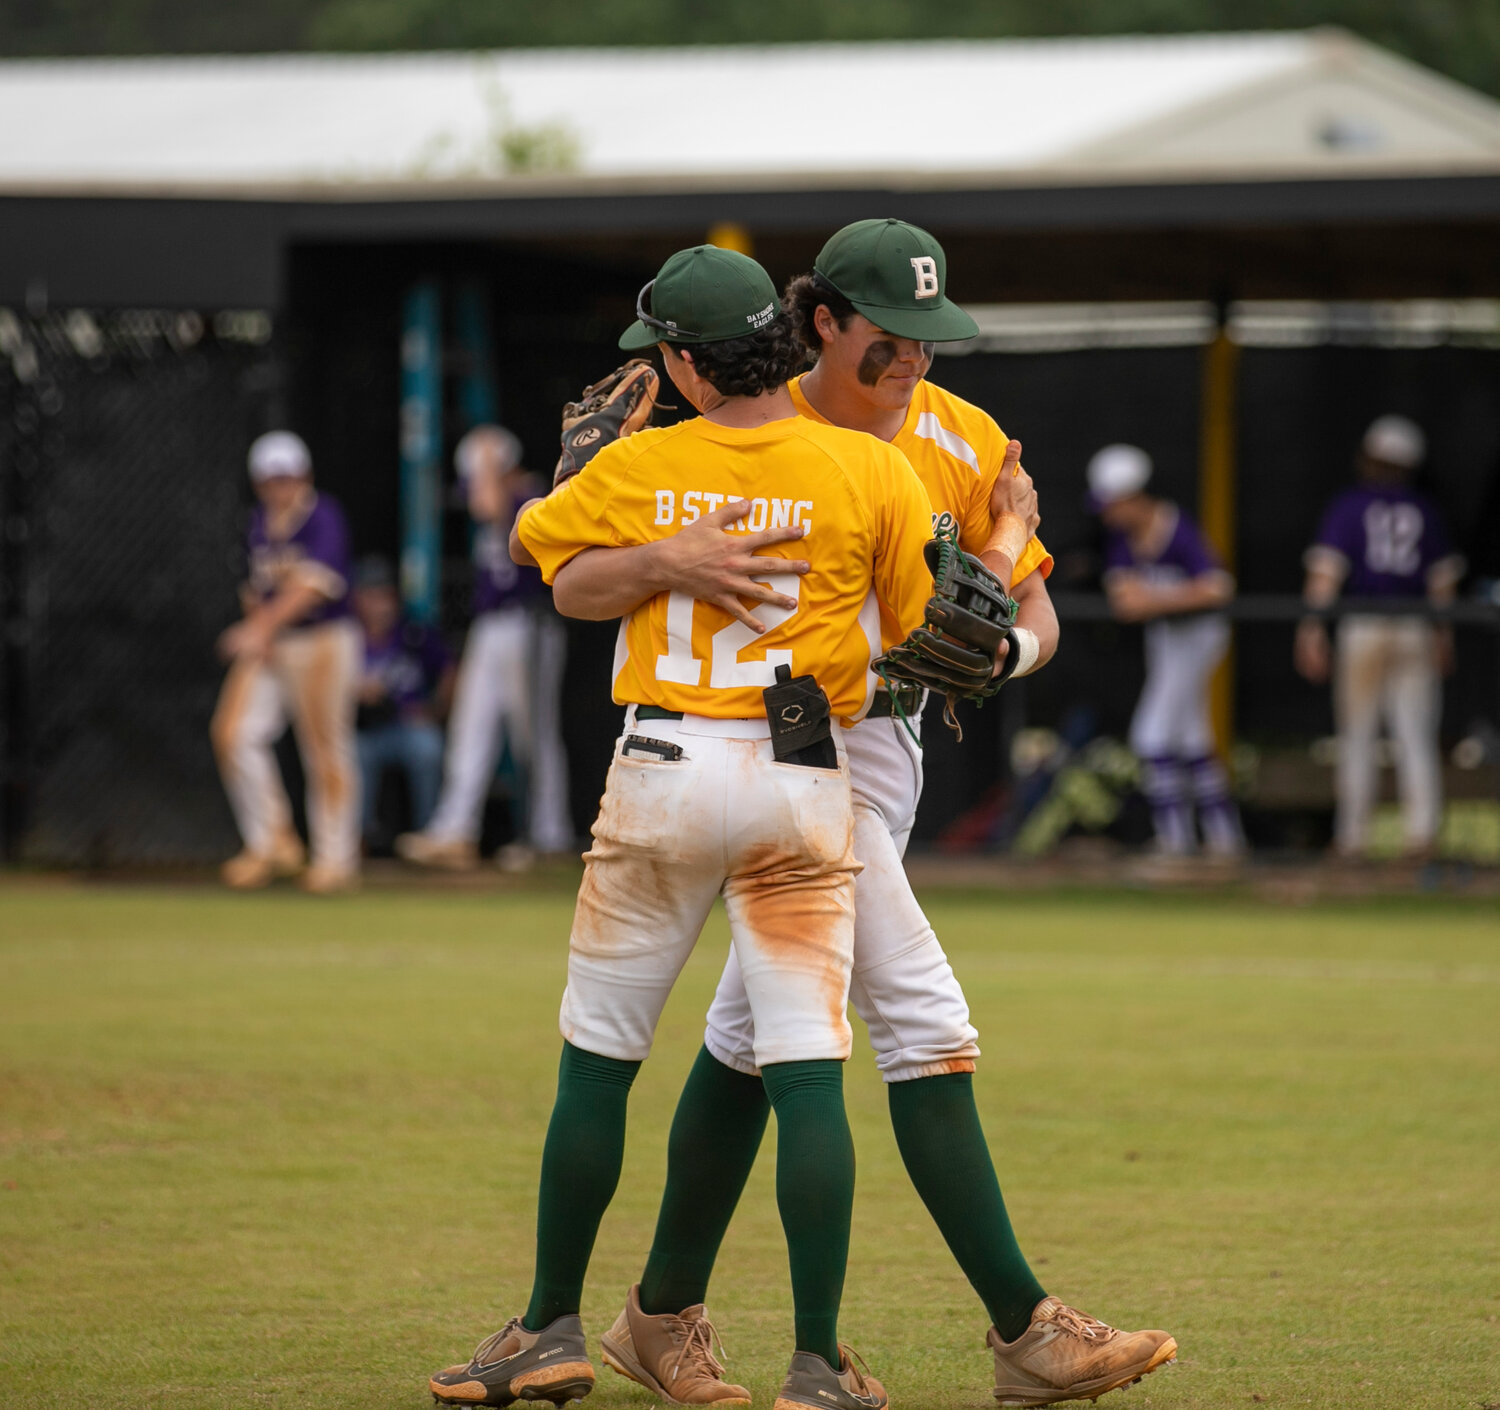 Eagle senior Streed Crooms embraces younger brother Nate after the latter completed a combined no-hitter to send Bayshore Christian to the second round of the AHSAA Class 2A state playoffs after a sweep of the Ranburne Bulldogs Friday, April 21, in Daphne. Friday’s pair of wins pushed a winning streak for the Eagles to 12 games where they hadn’t lost since March 21.